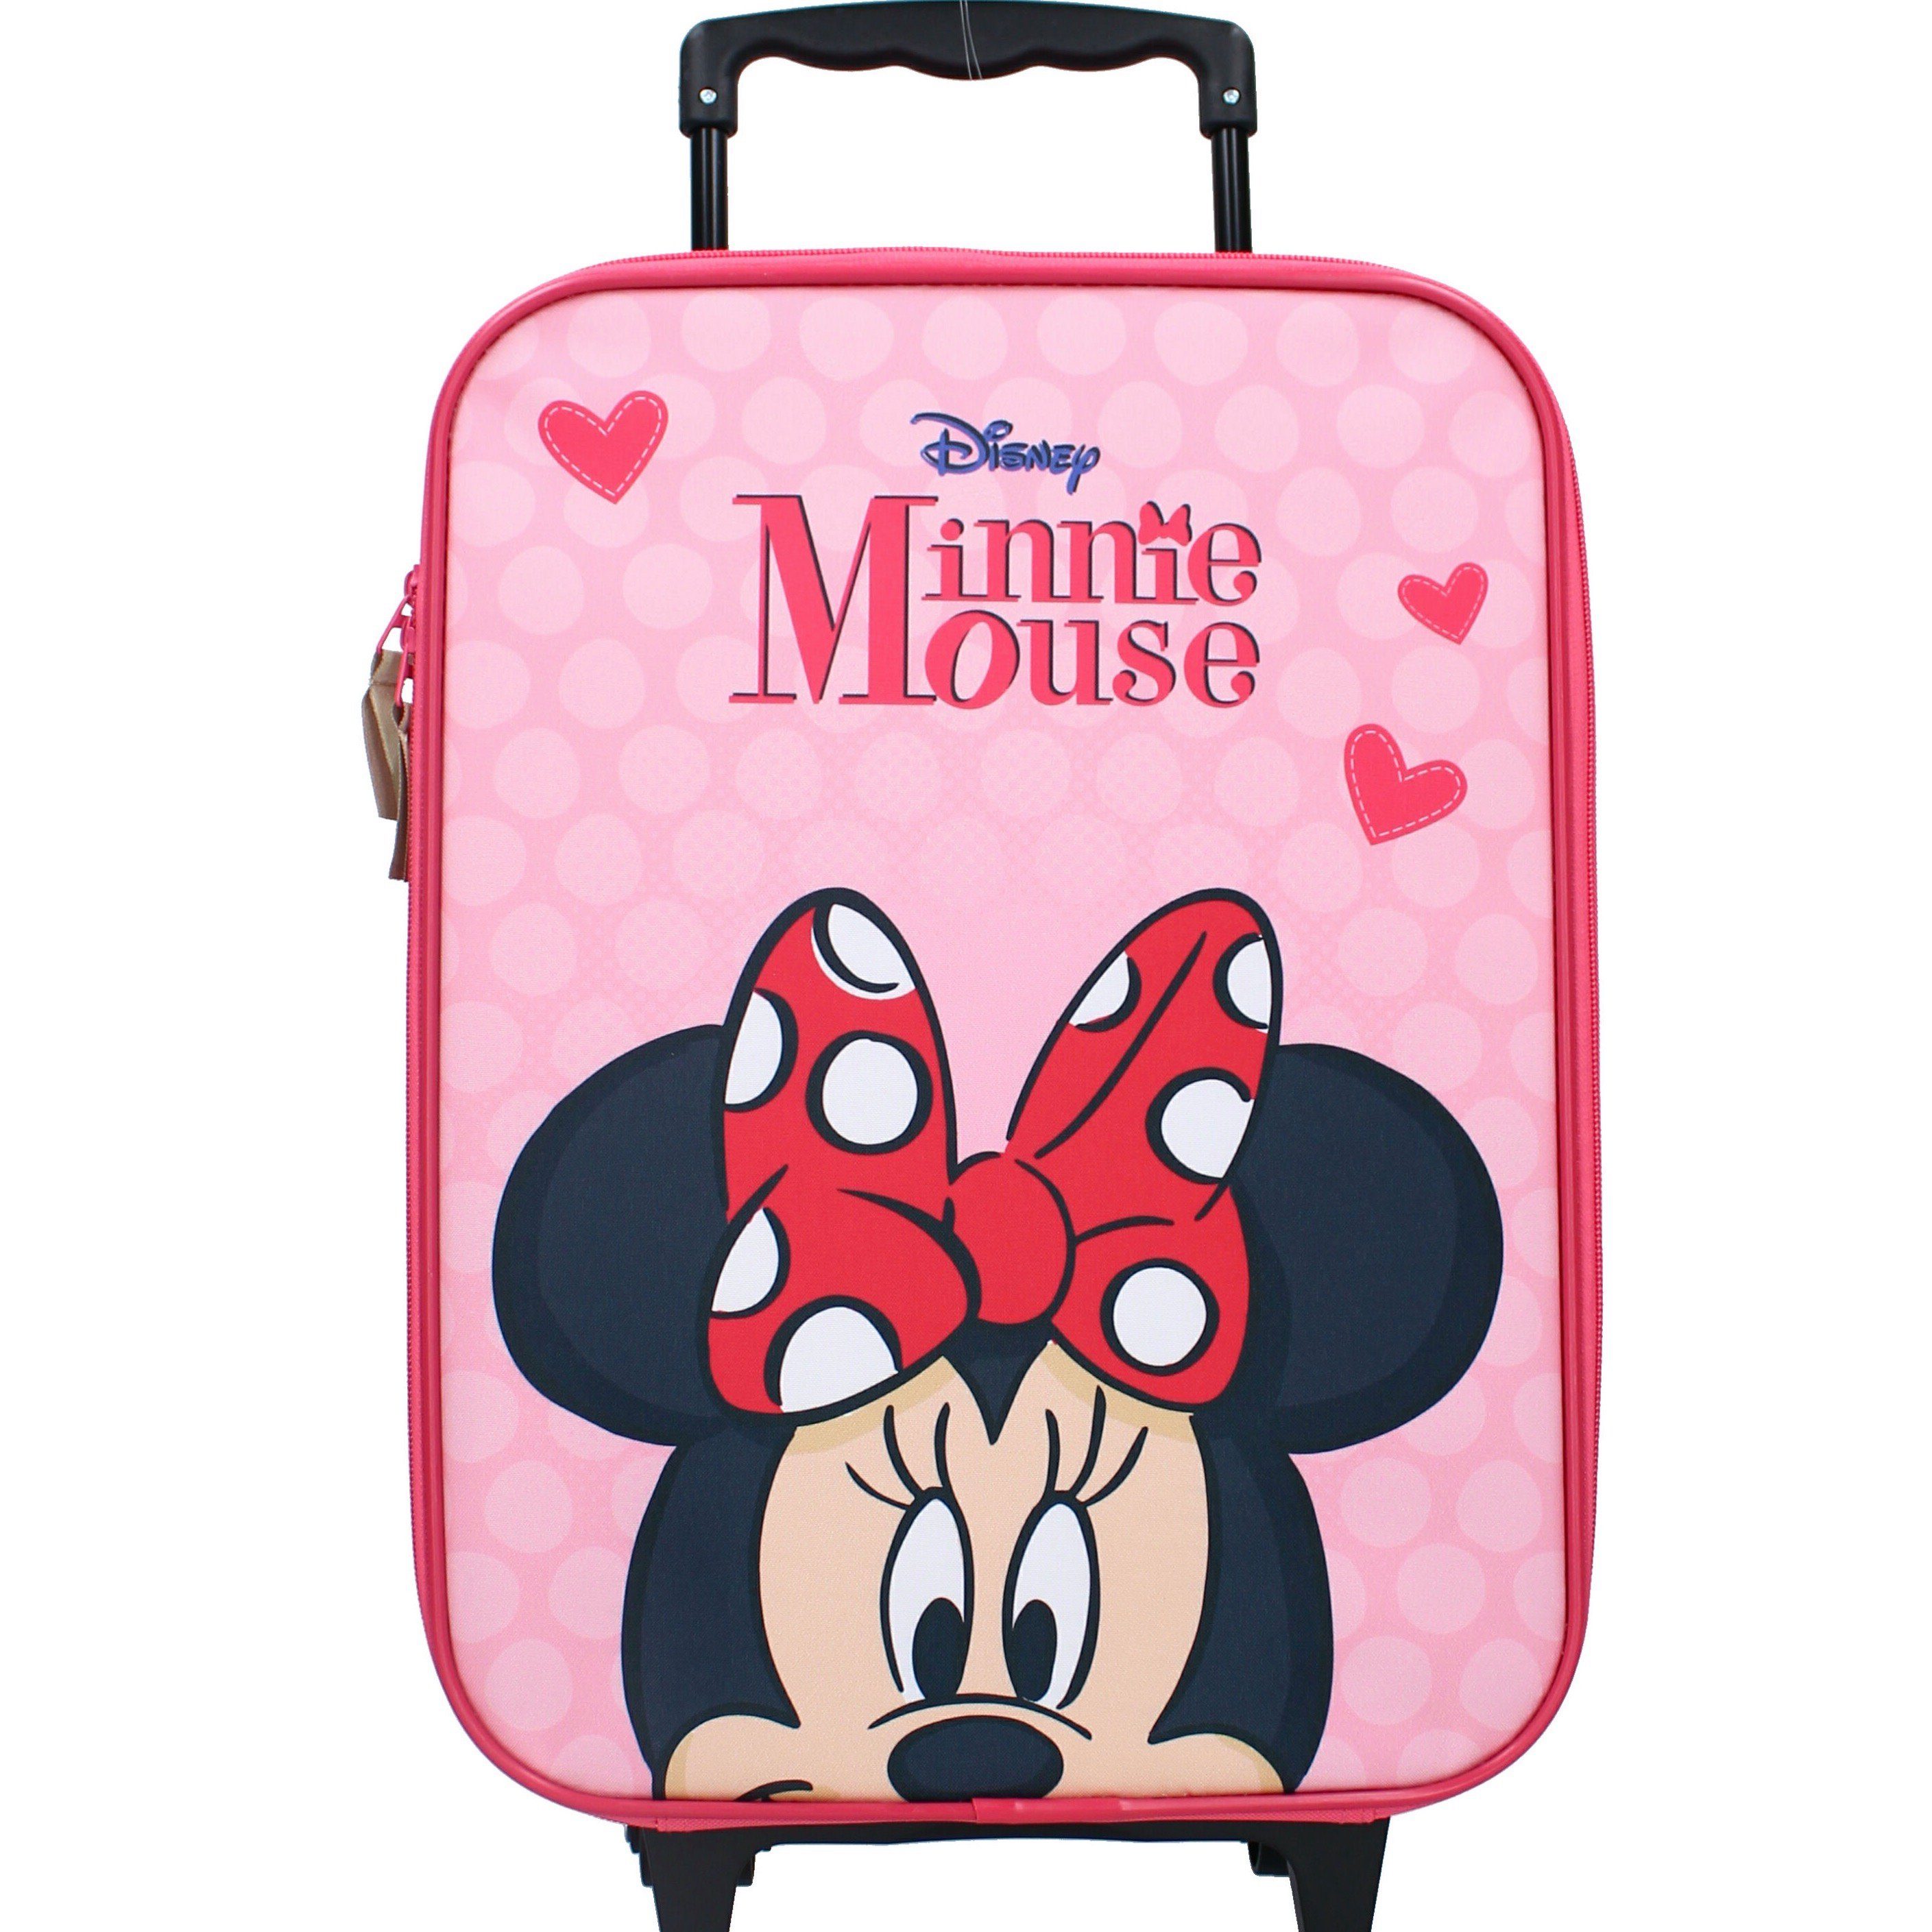 Kinderkoffer Minni Disney Mouse Trolley Maus Pink, Rollen, Trolley 2 Minnie Kindertrolley